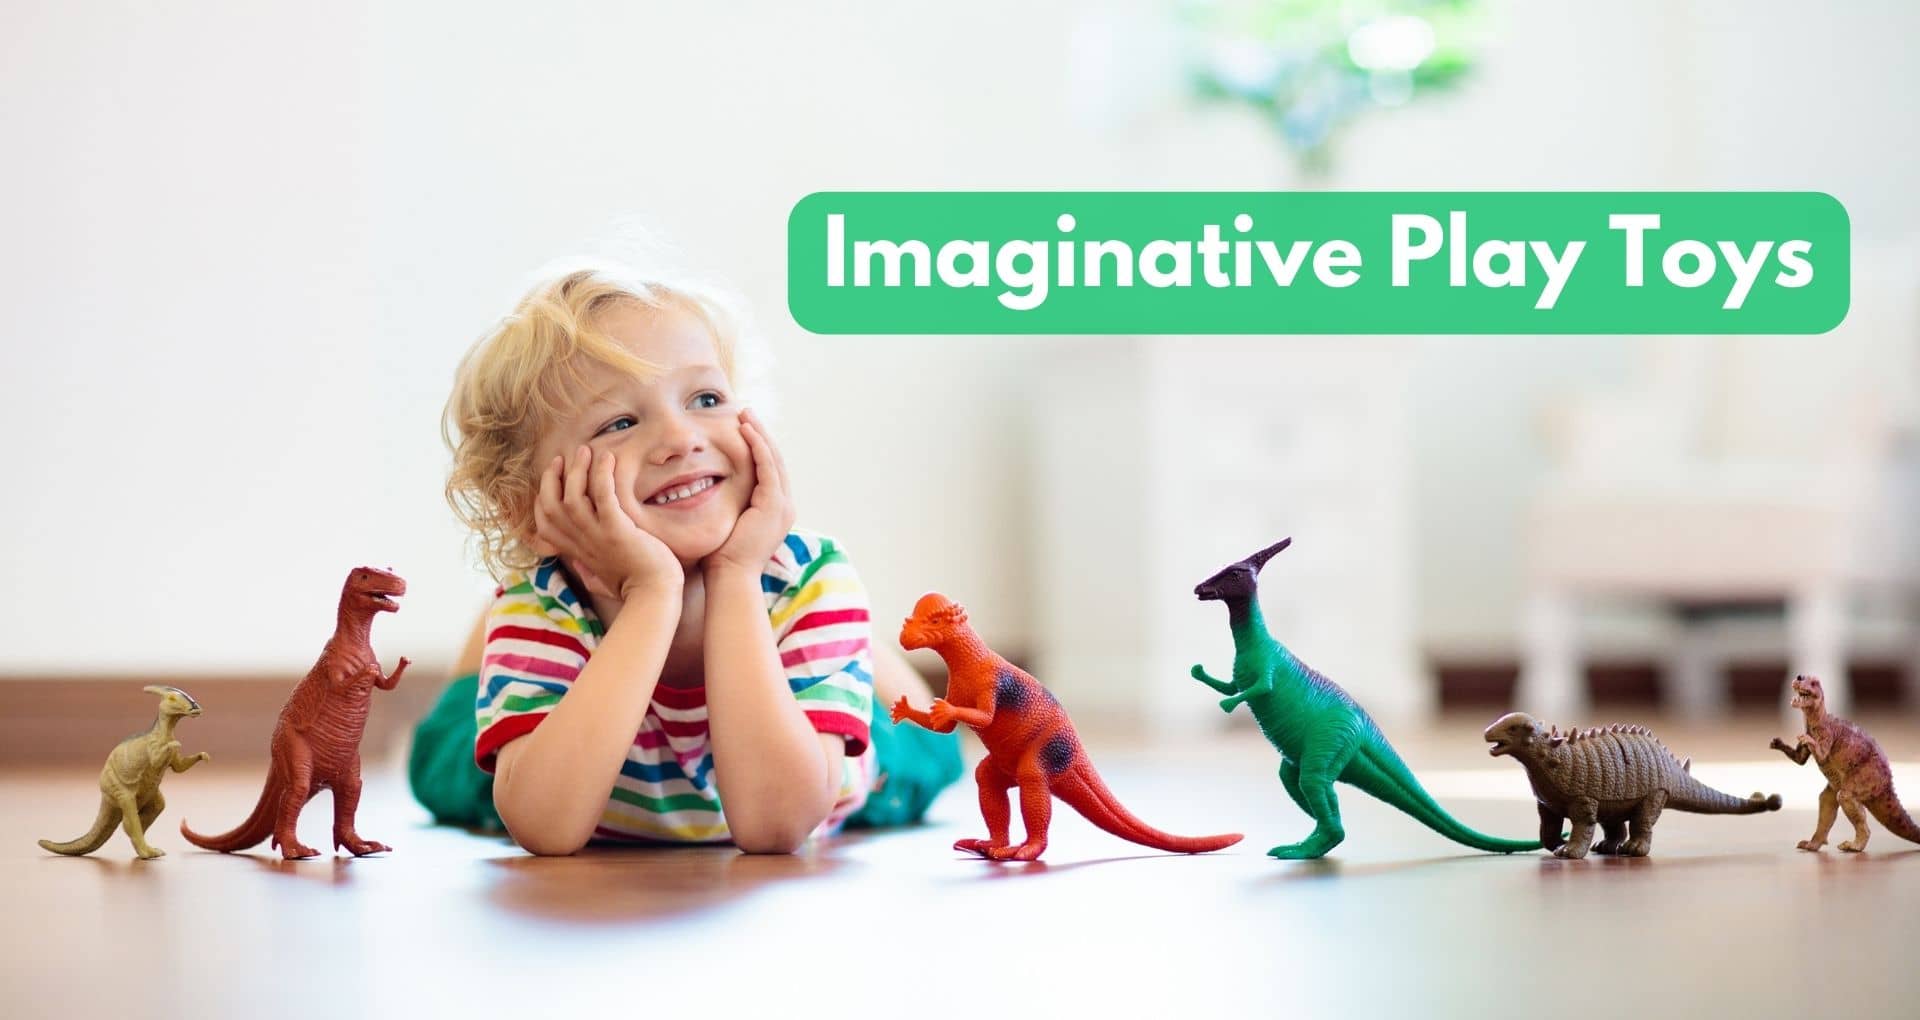 What Are Some Imaginative Play Toys?